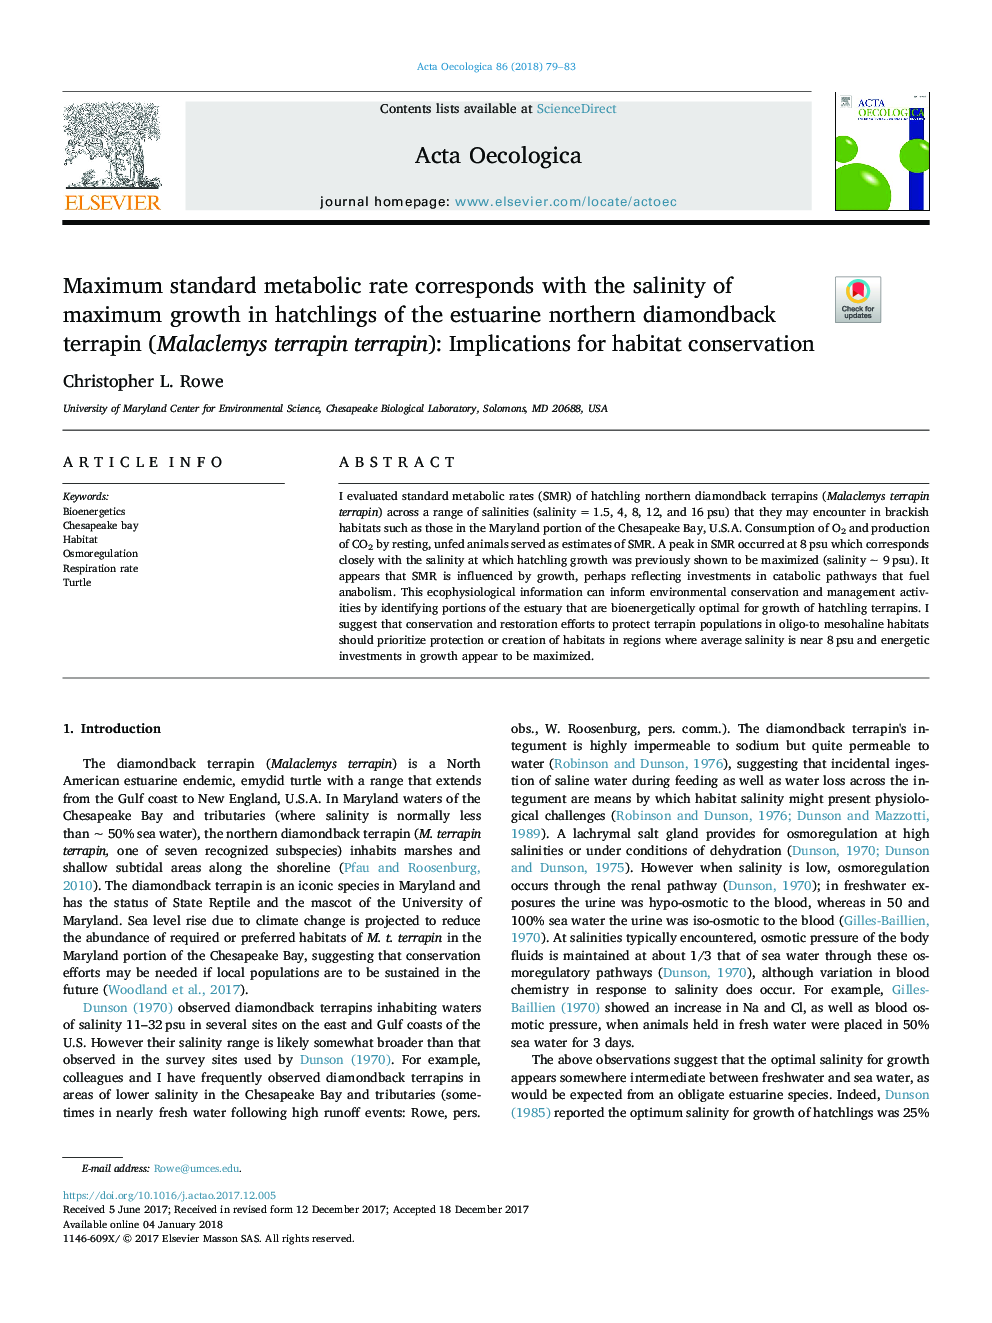 Maximum standard metabolic rate corresponds with the salinity of maximum growth in hatchlings of the estuarine northern diamondback terrapin (Malaclemys terrapin terrapin): Implications for habitat conservation